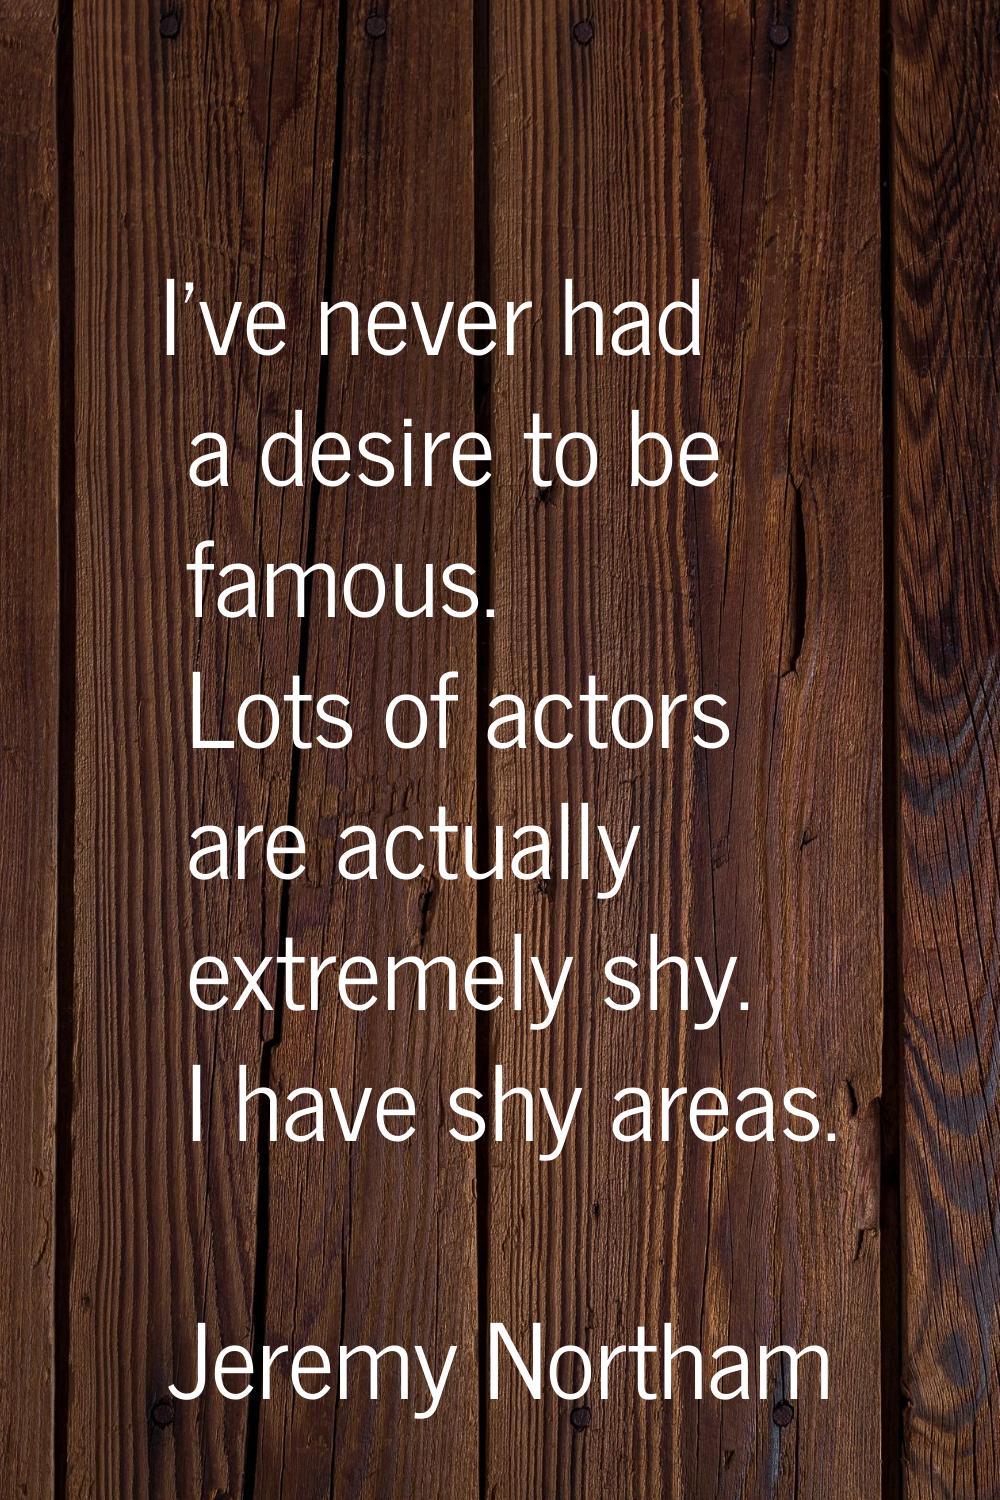 I've never had a desire to be famous. Lots of actors are actually extremely shy. I have shy areas.